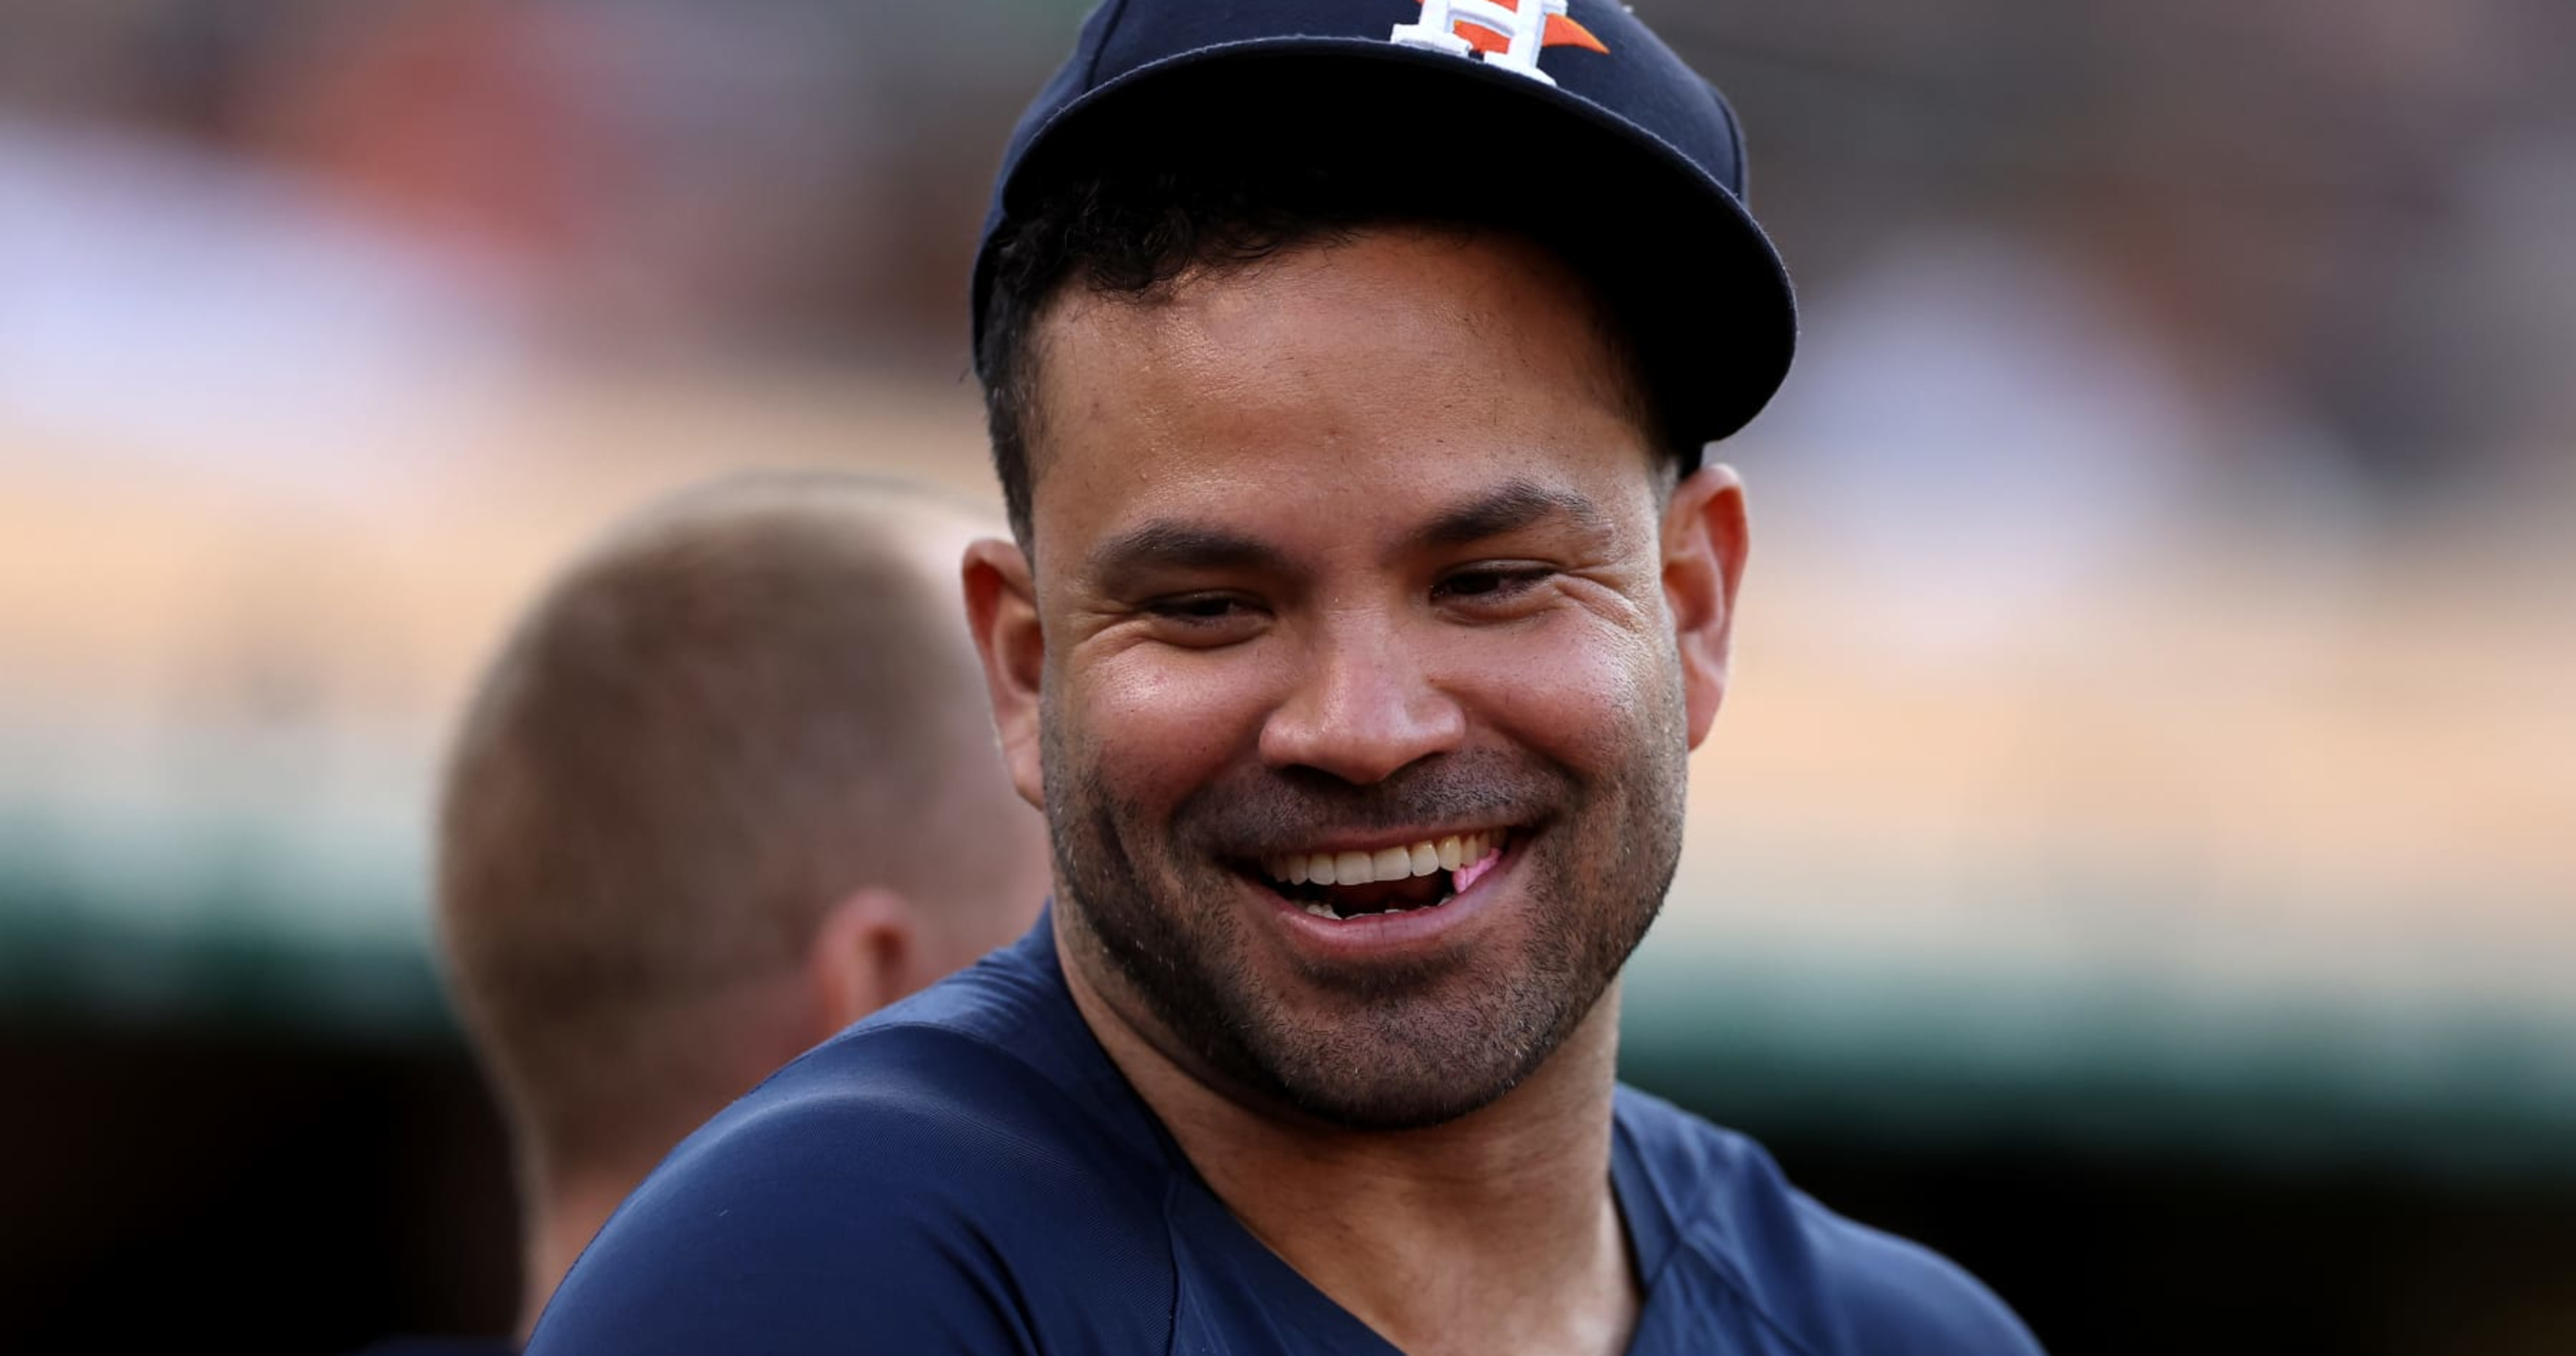 If the Astros have been overlooked this season, the return of Alvarez and  Altuve could change that – News-Herald